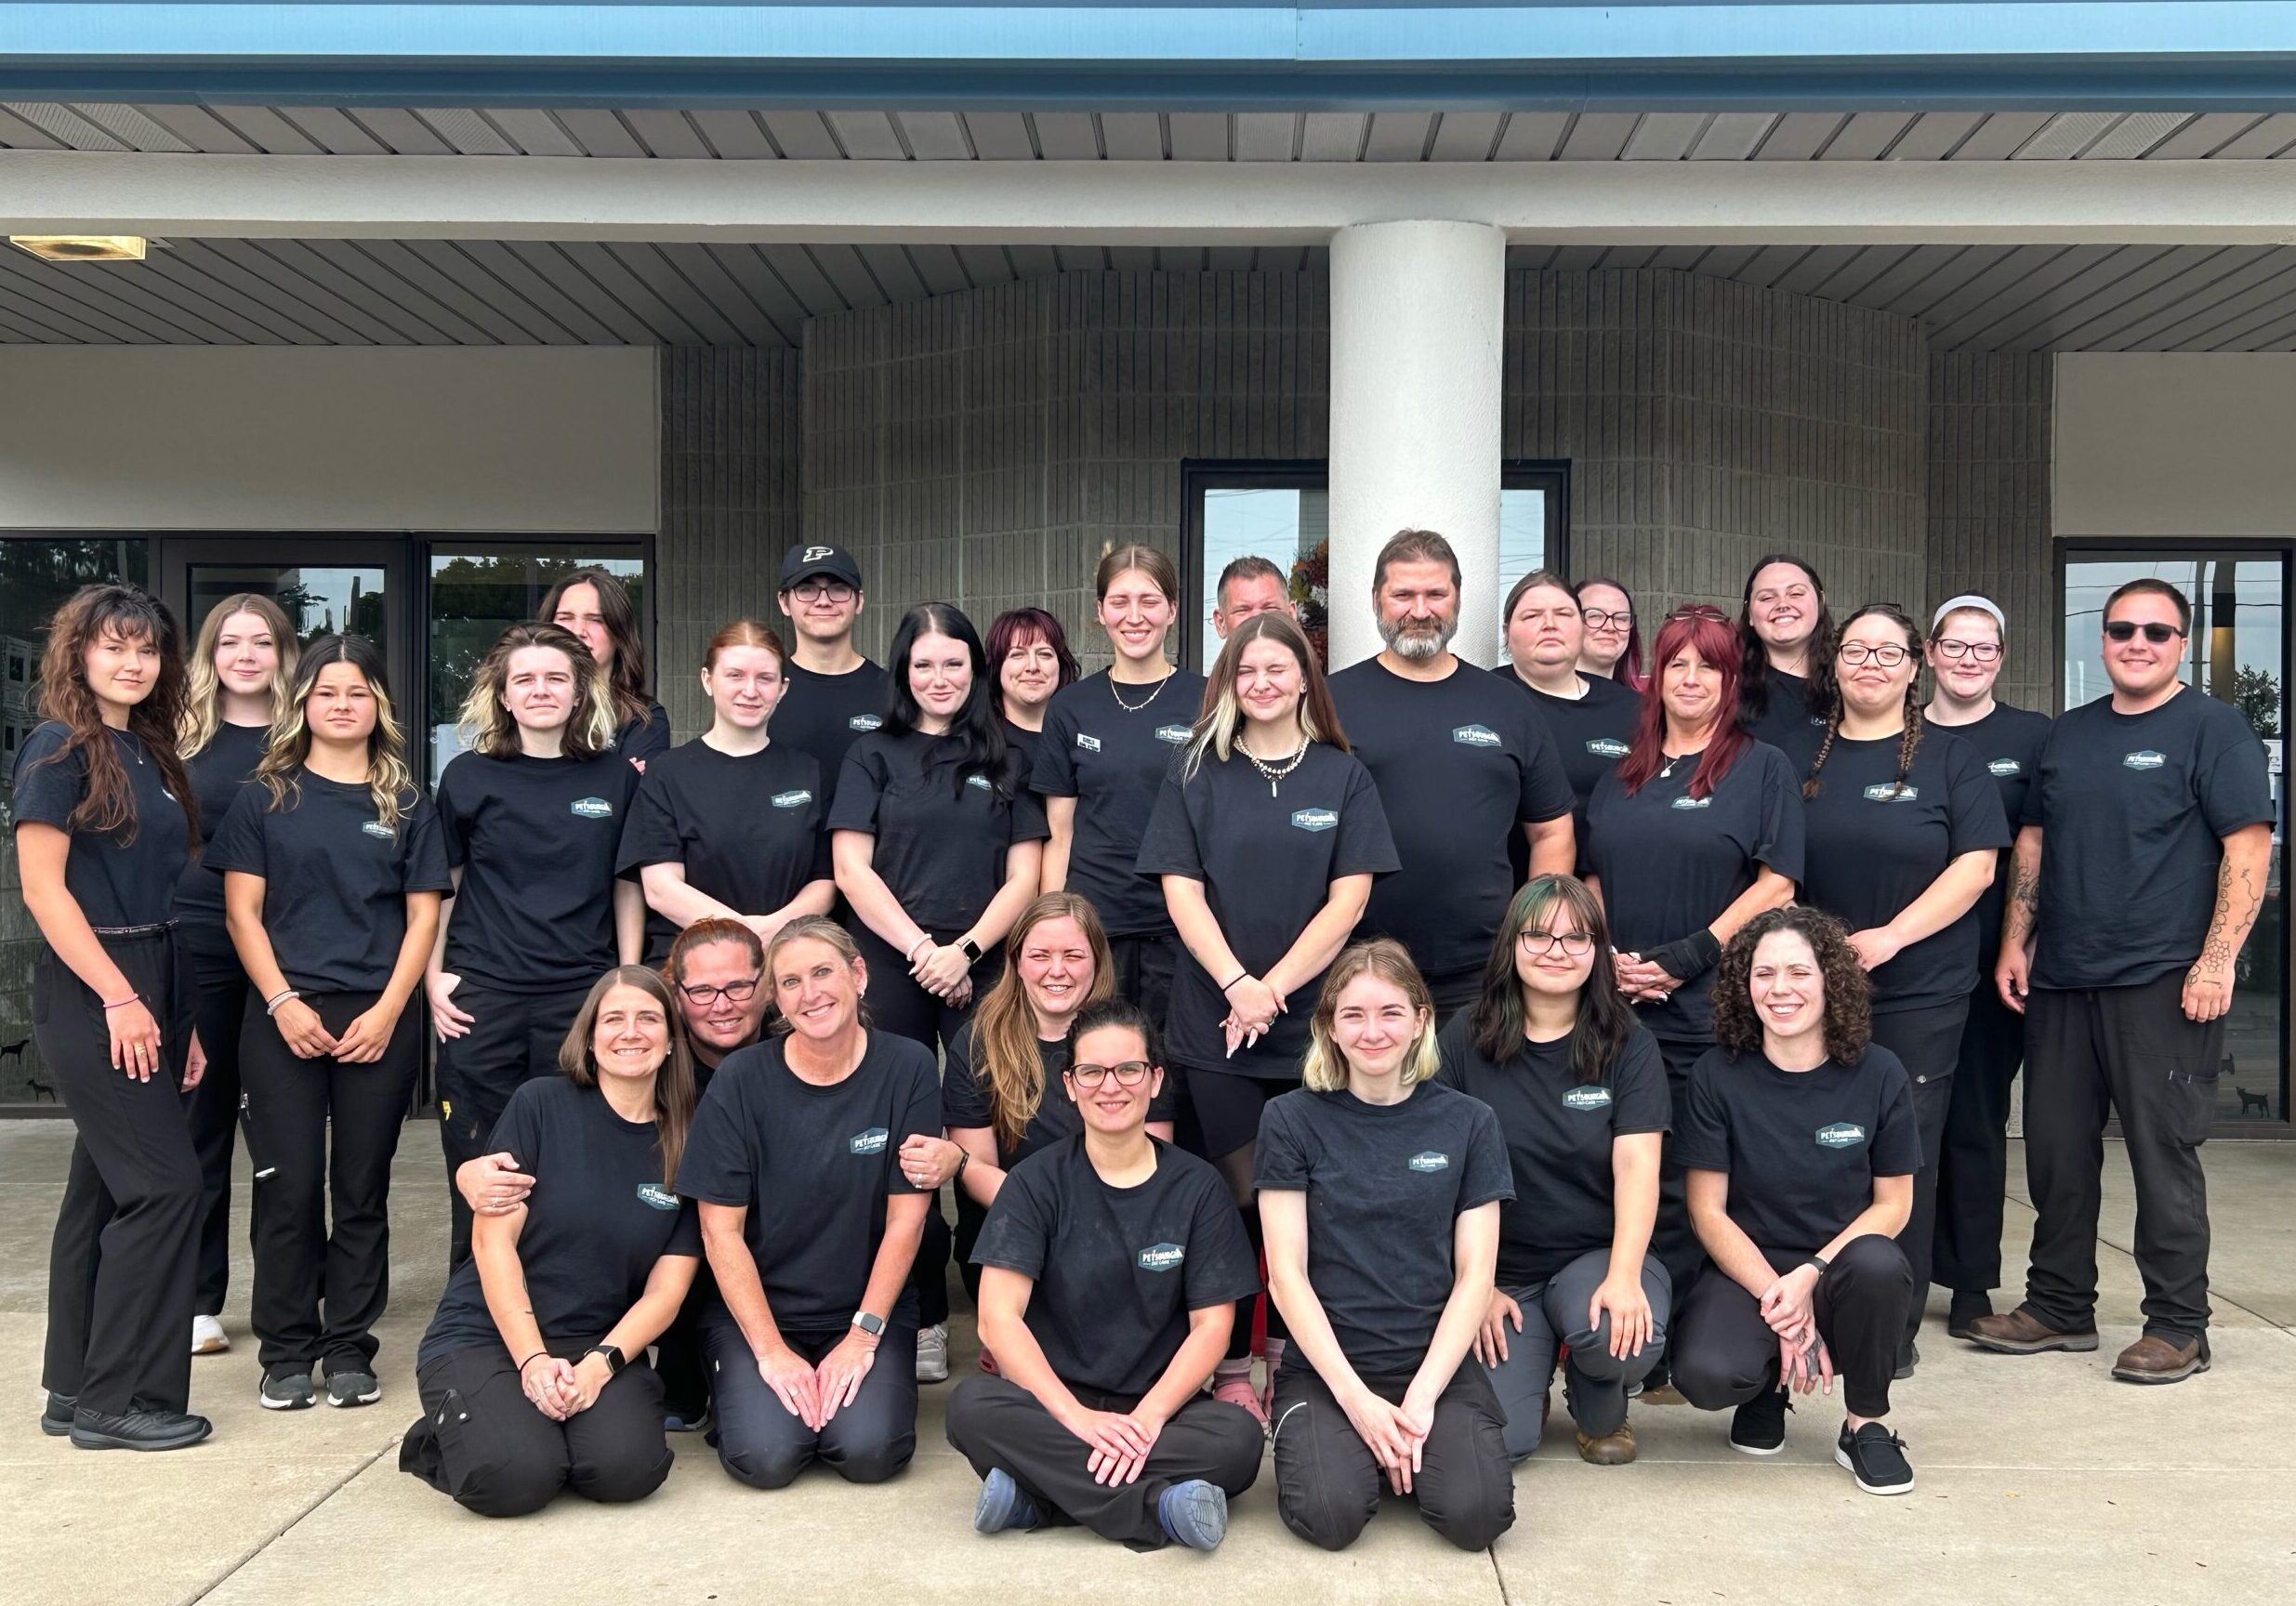 The entire vet team of Petsburgh Pet Care in Lafayette, IN standing in front of the building wearing black